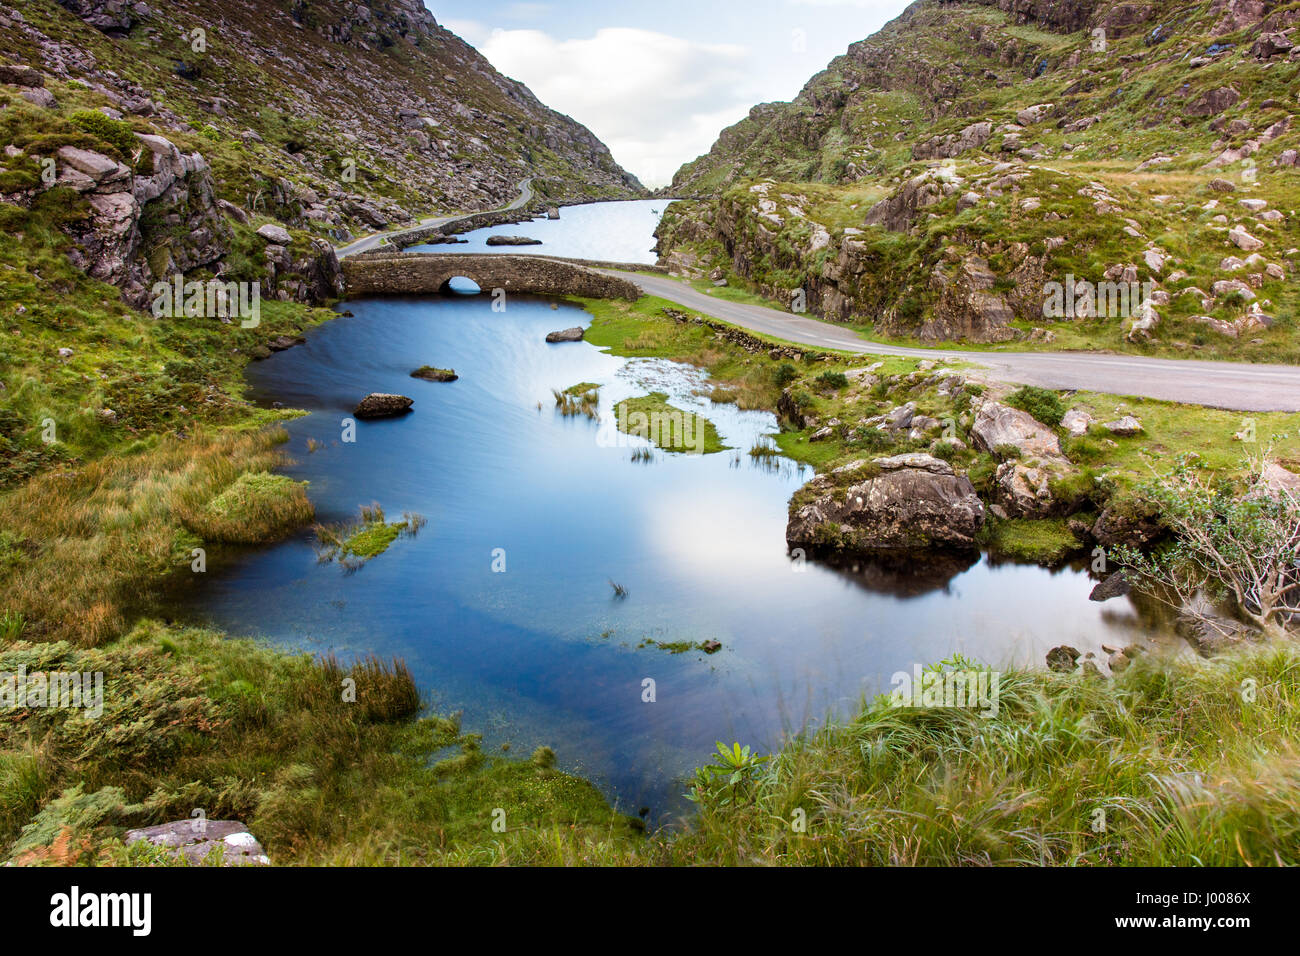 The River Loe & narrow mountain road wind through the Gap of Dunloe valley, nestled in the Macgillycuddy's Reeks mountains of Ireland's County Kerry. Stock Photo